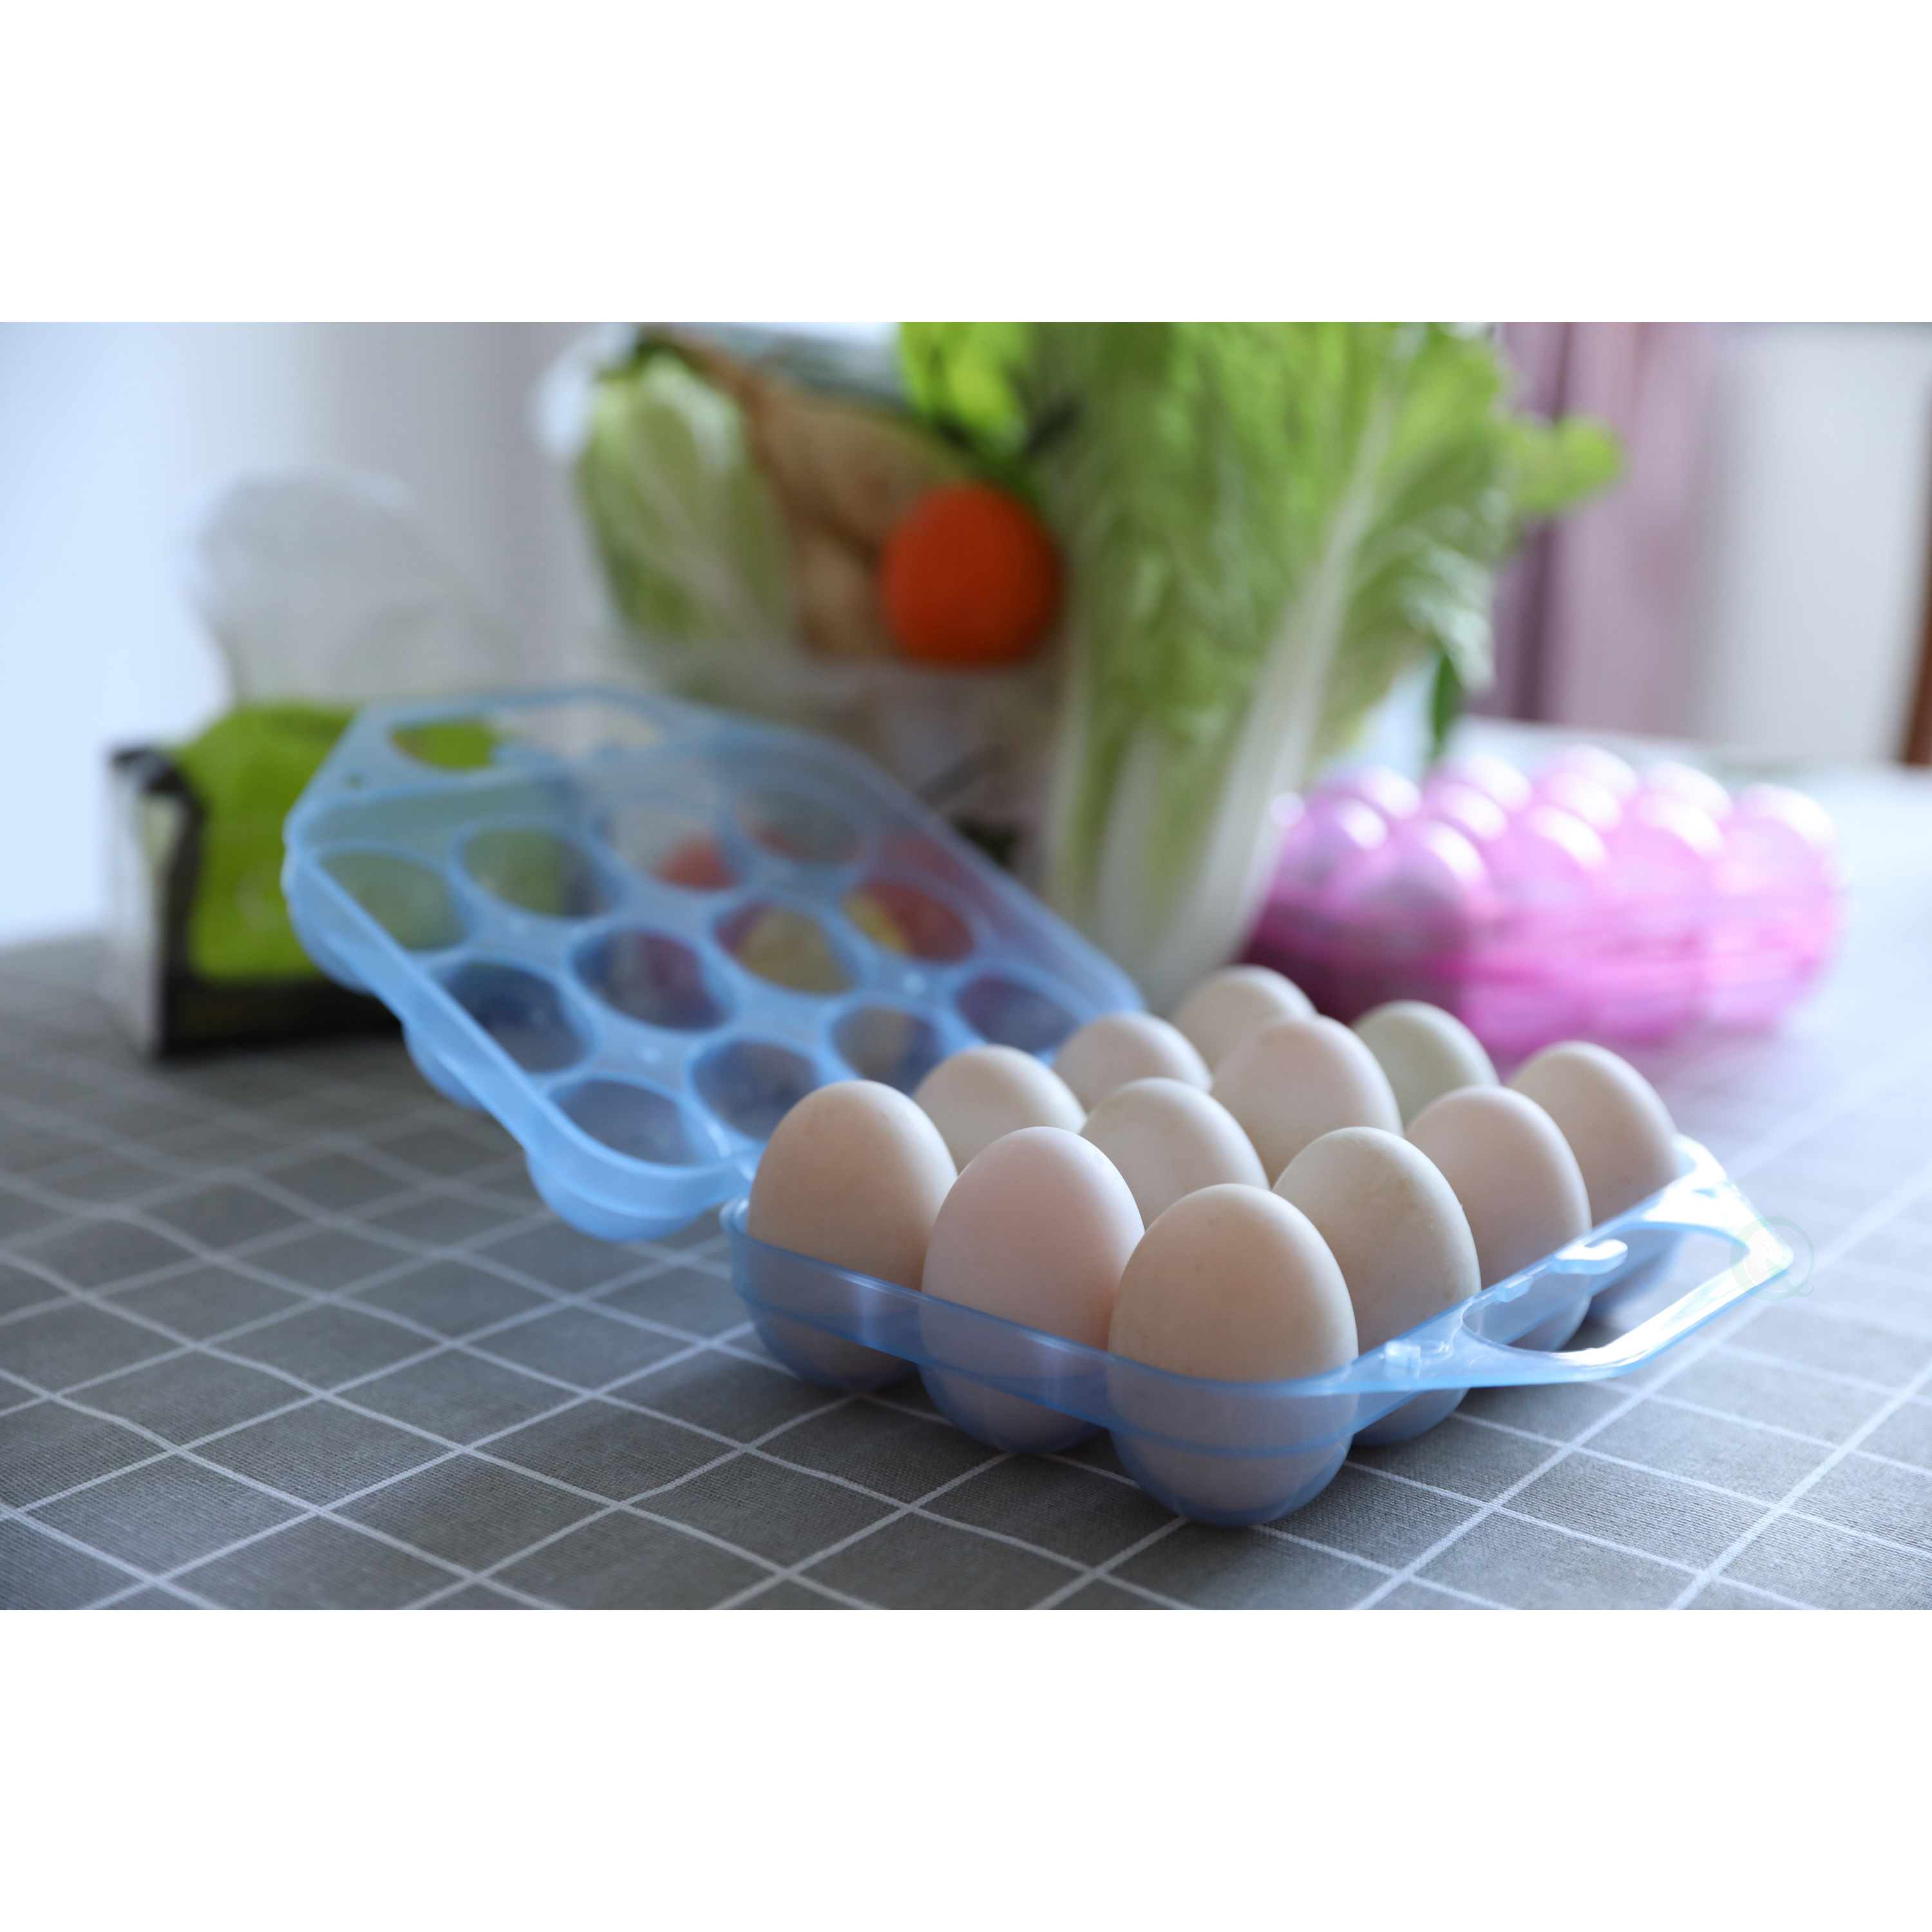 Clear Plastic Egg Carton-12 Egg Holder Carrying Case With Handle - Pink